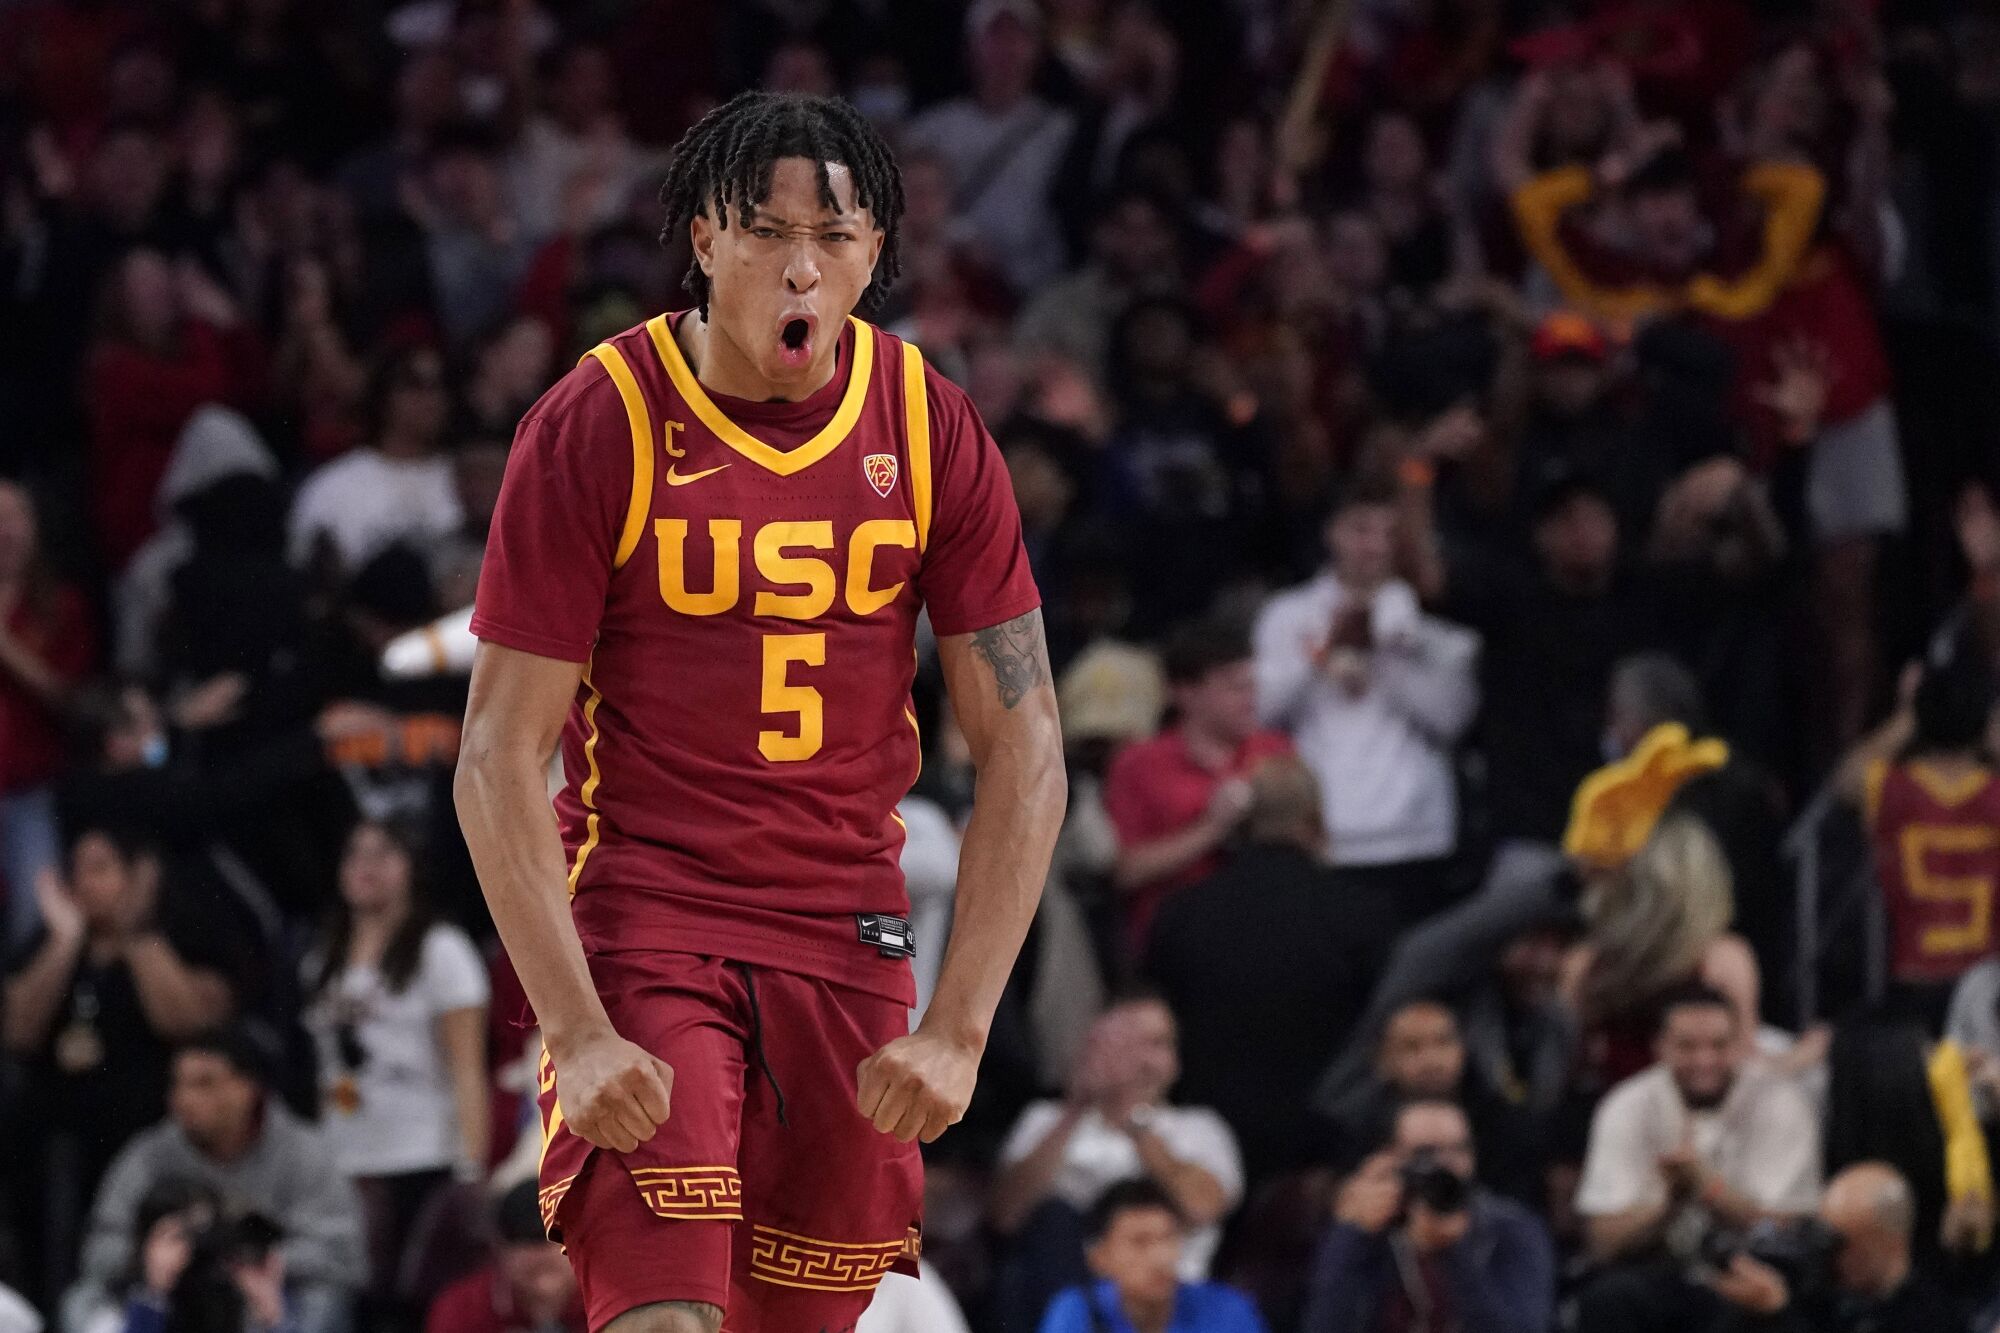 USC guard Boogie Ellis celebrates during the second half of a 77-64 comeback win over UCLA.